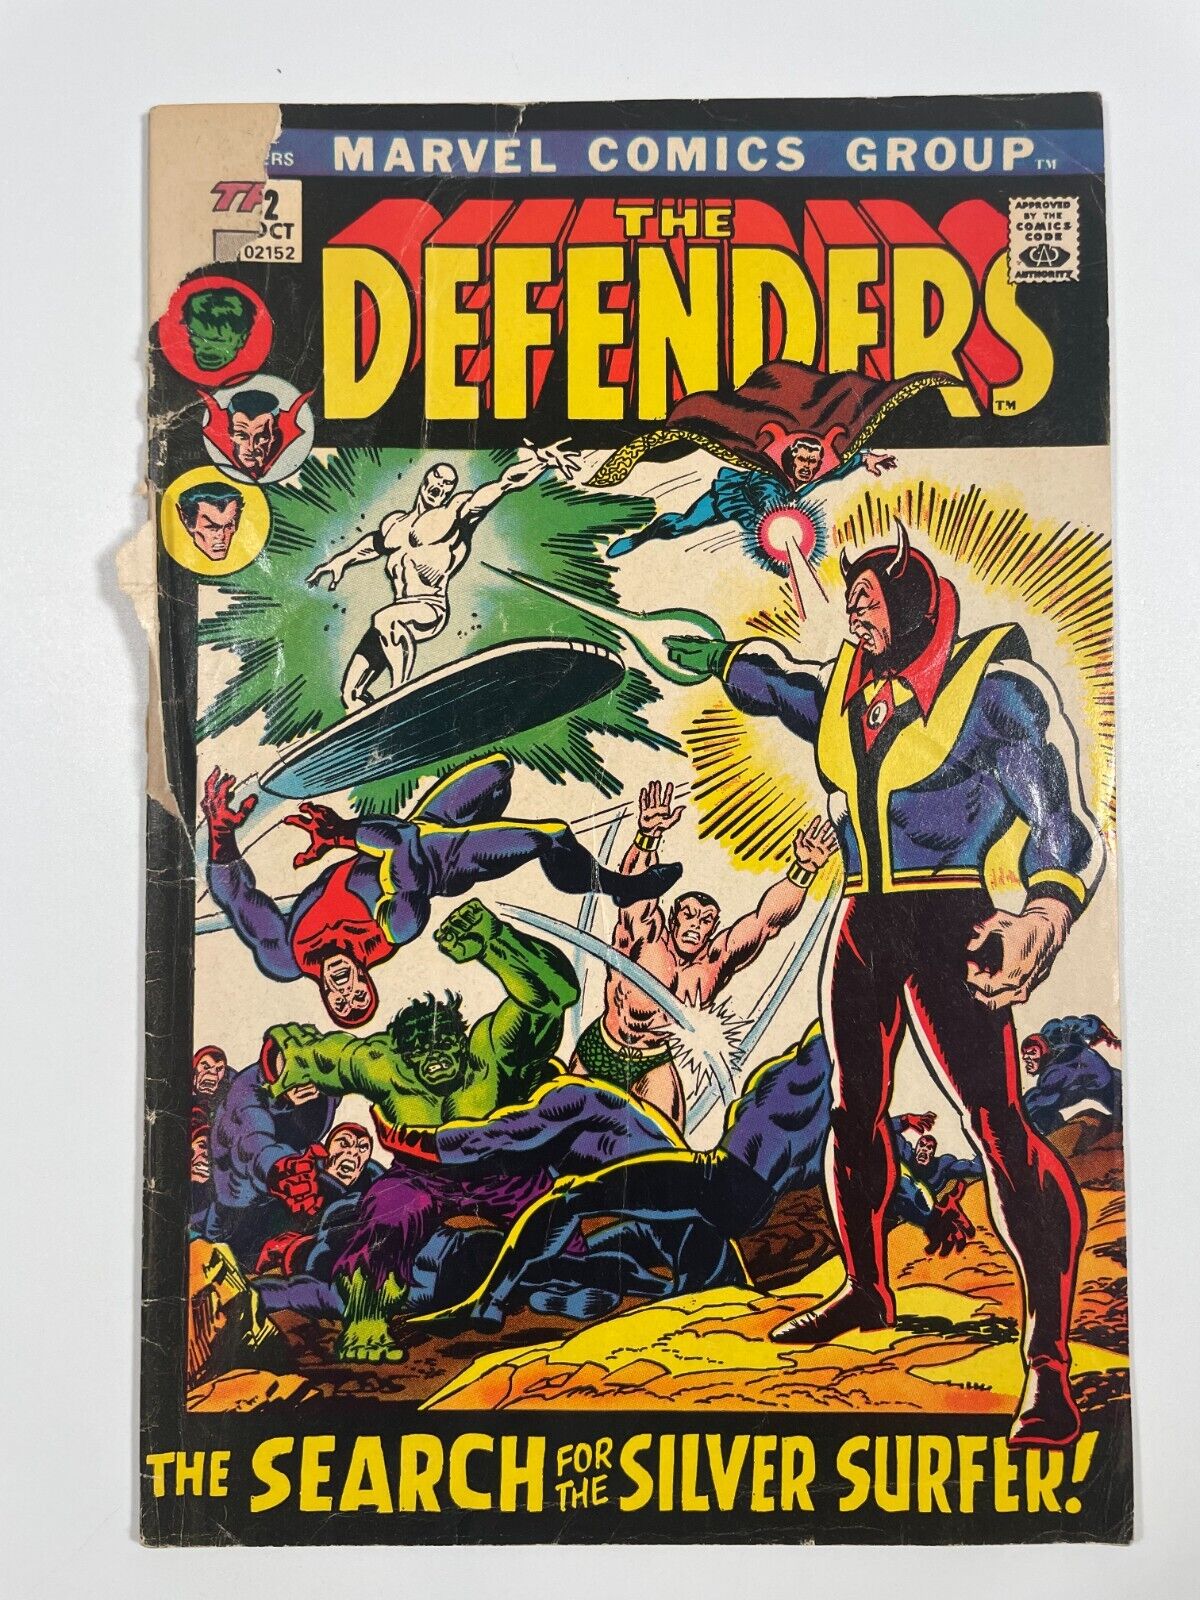 The Defenders #2 - 1972 - Low-grade - Silver Surfer joins team